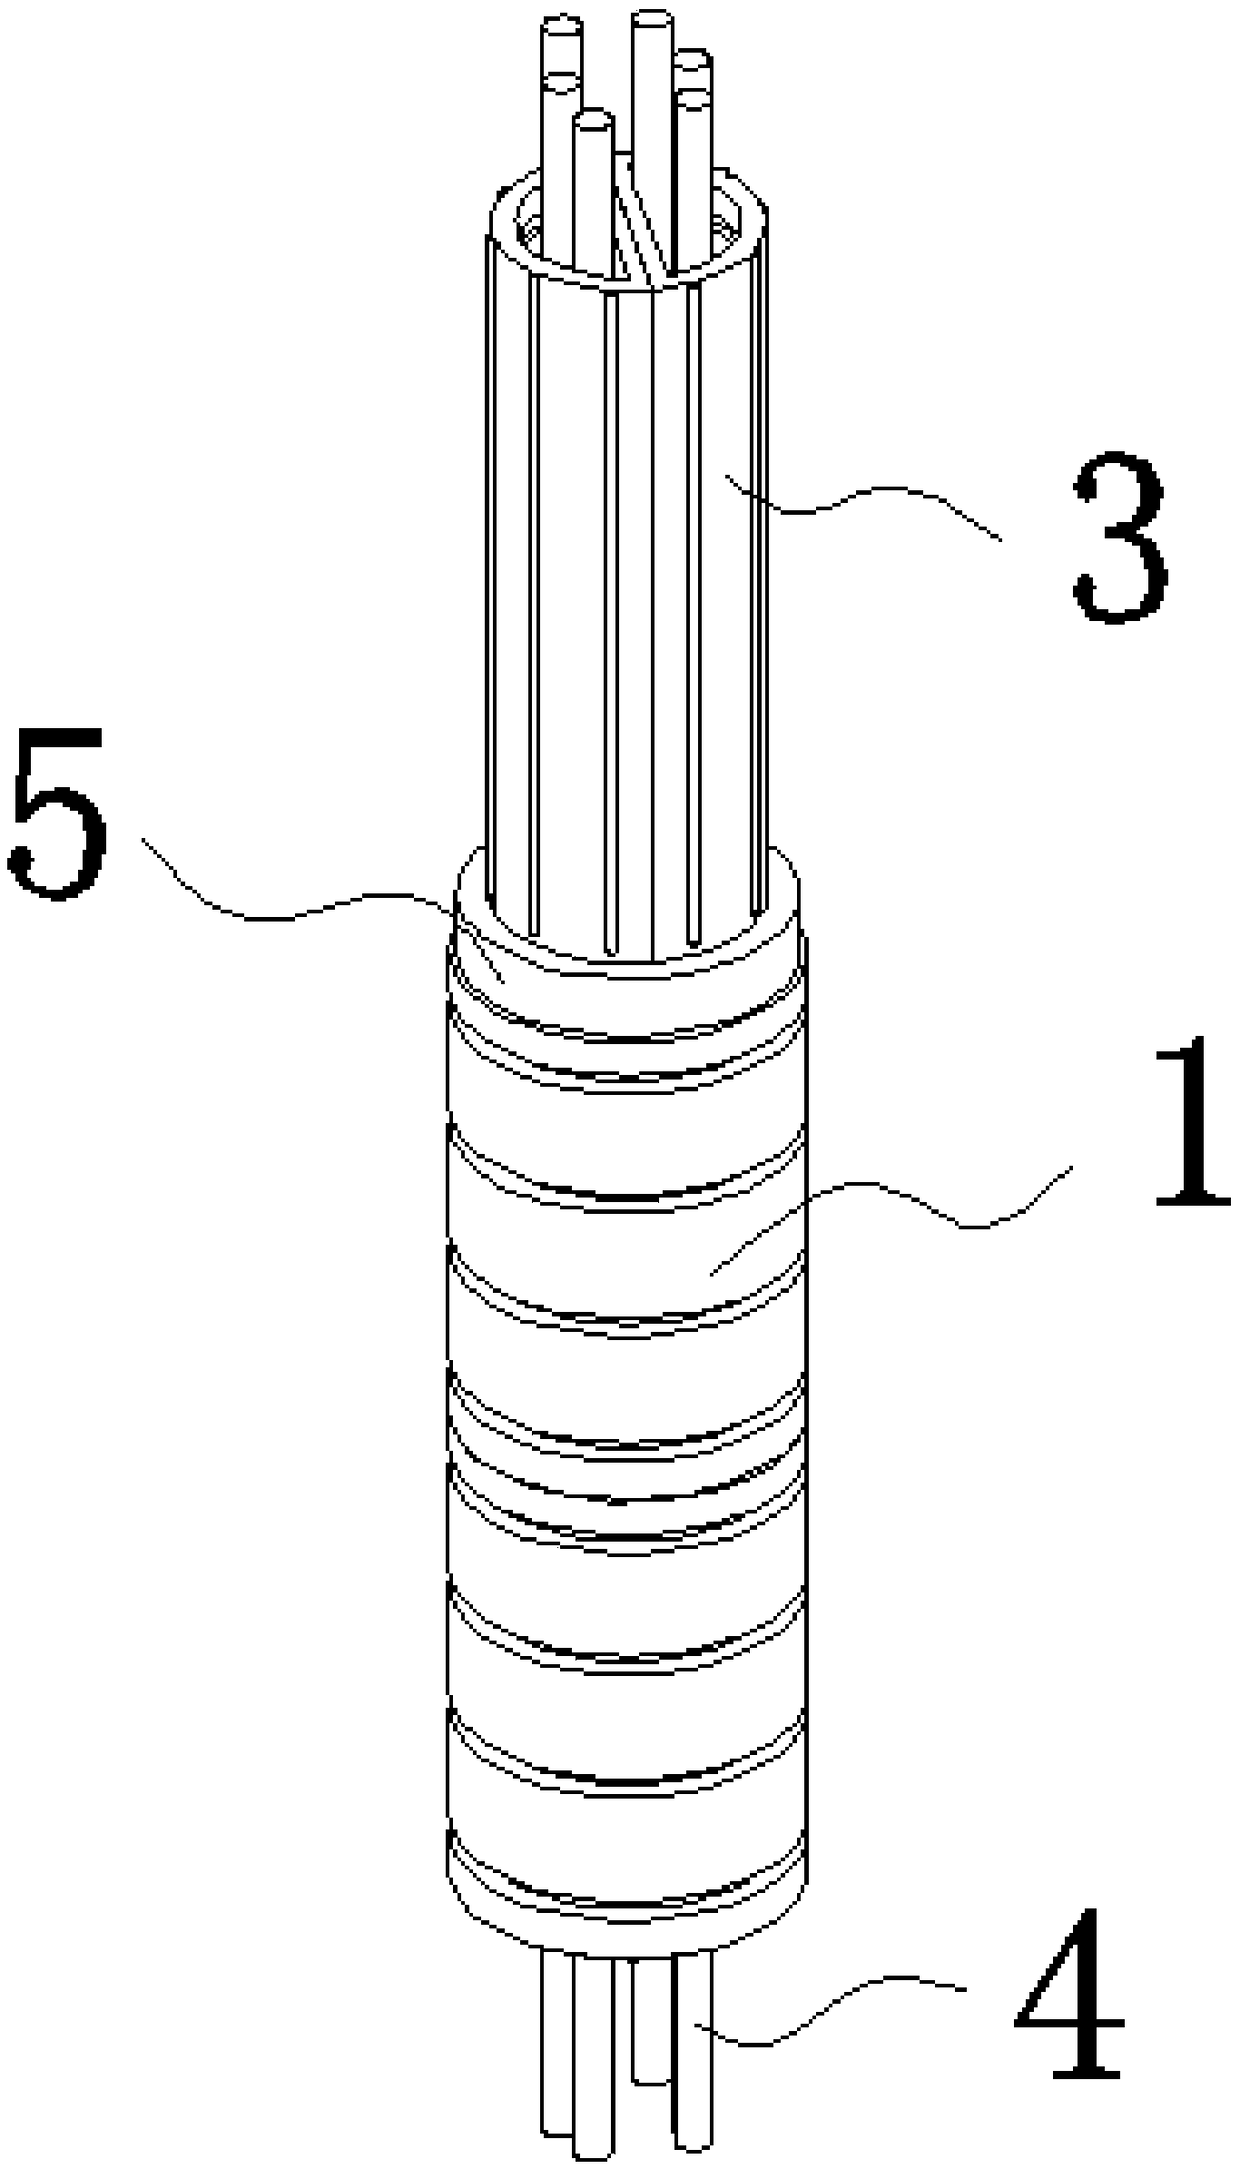 High-tenacity composite wire structure for shunting